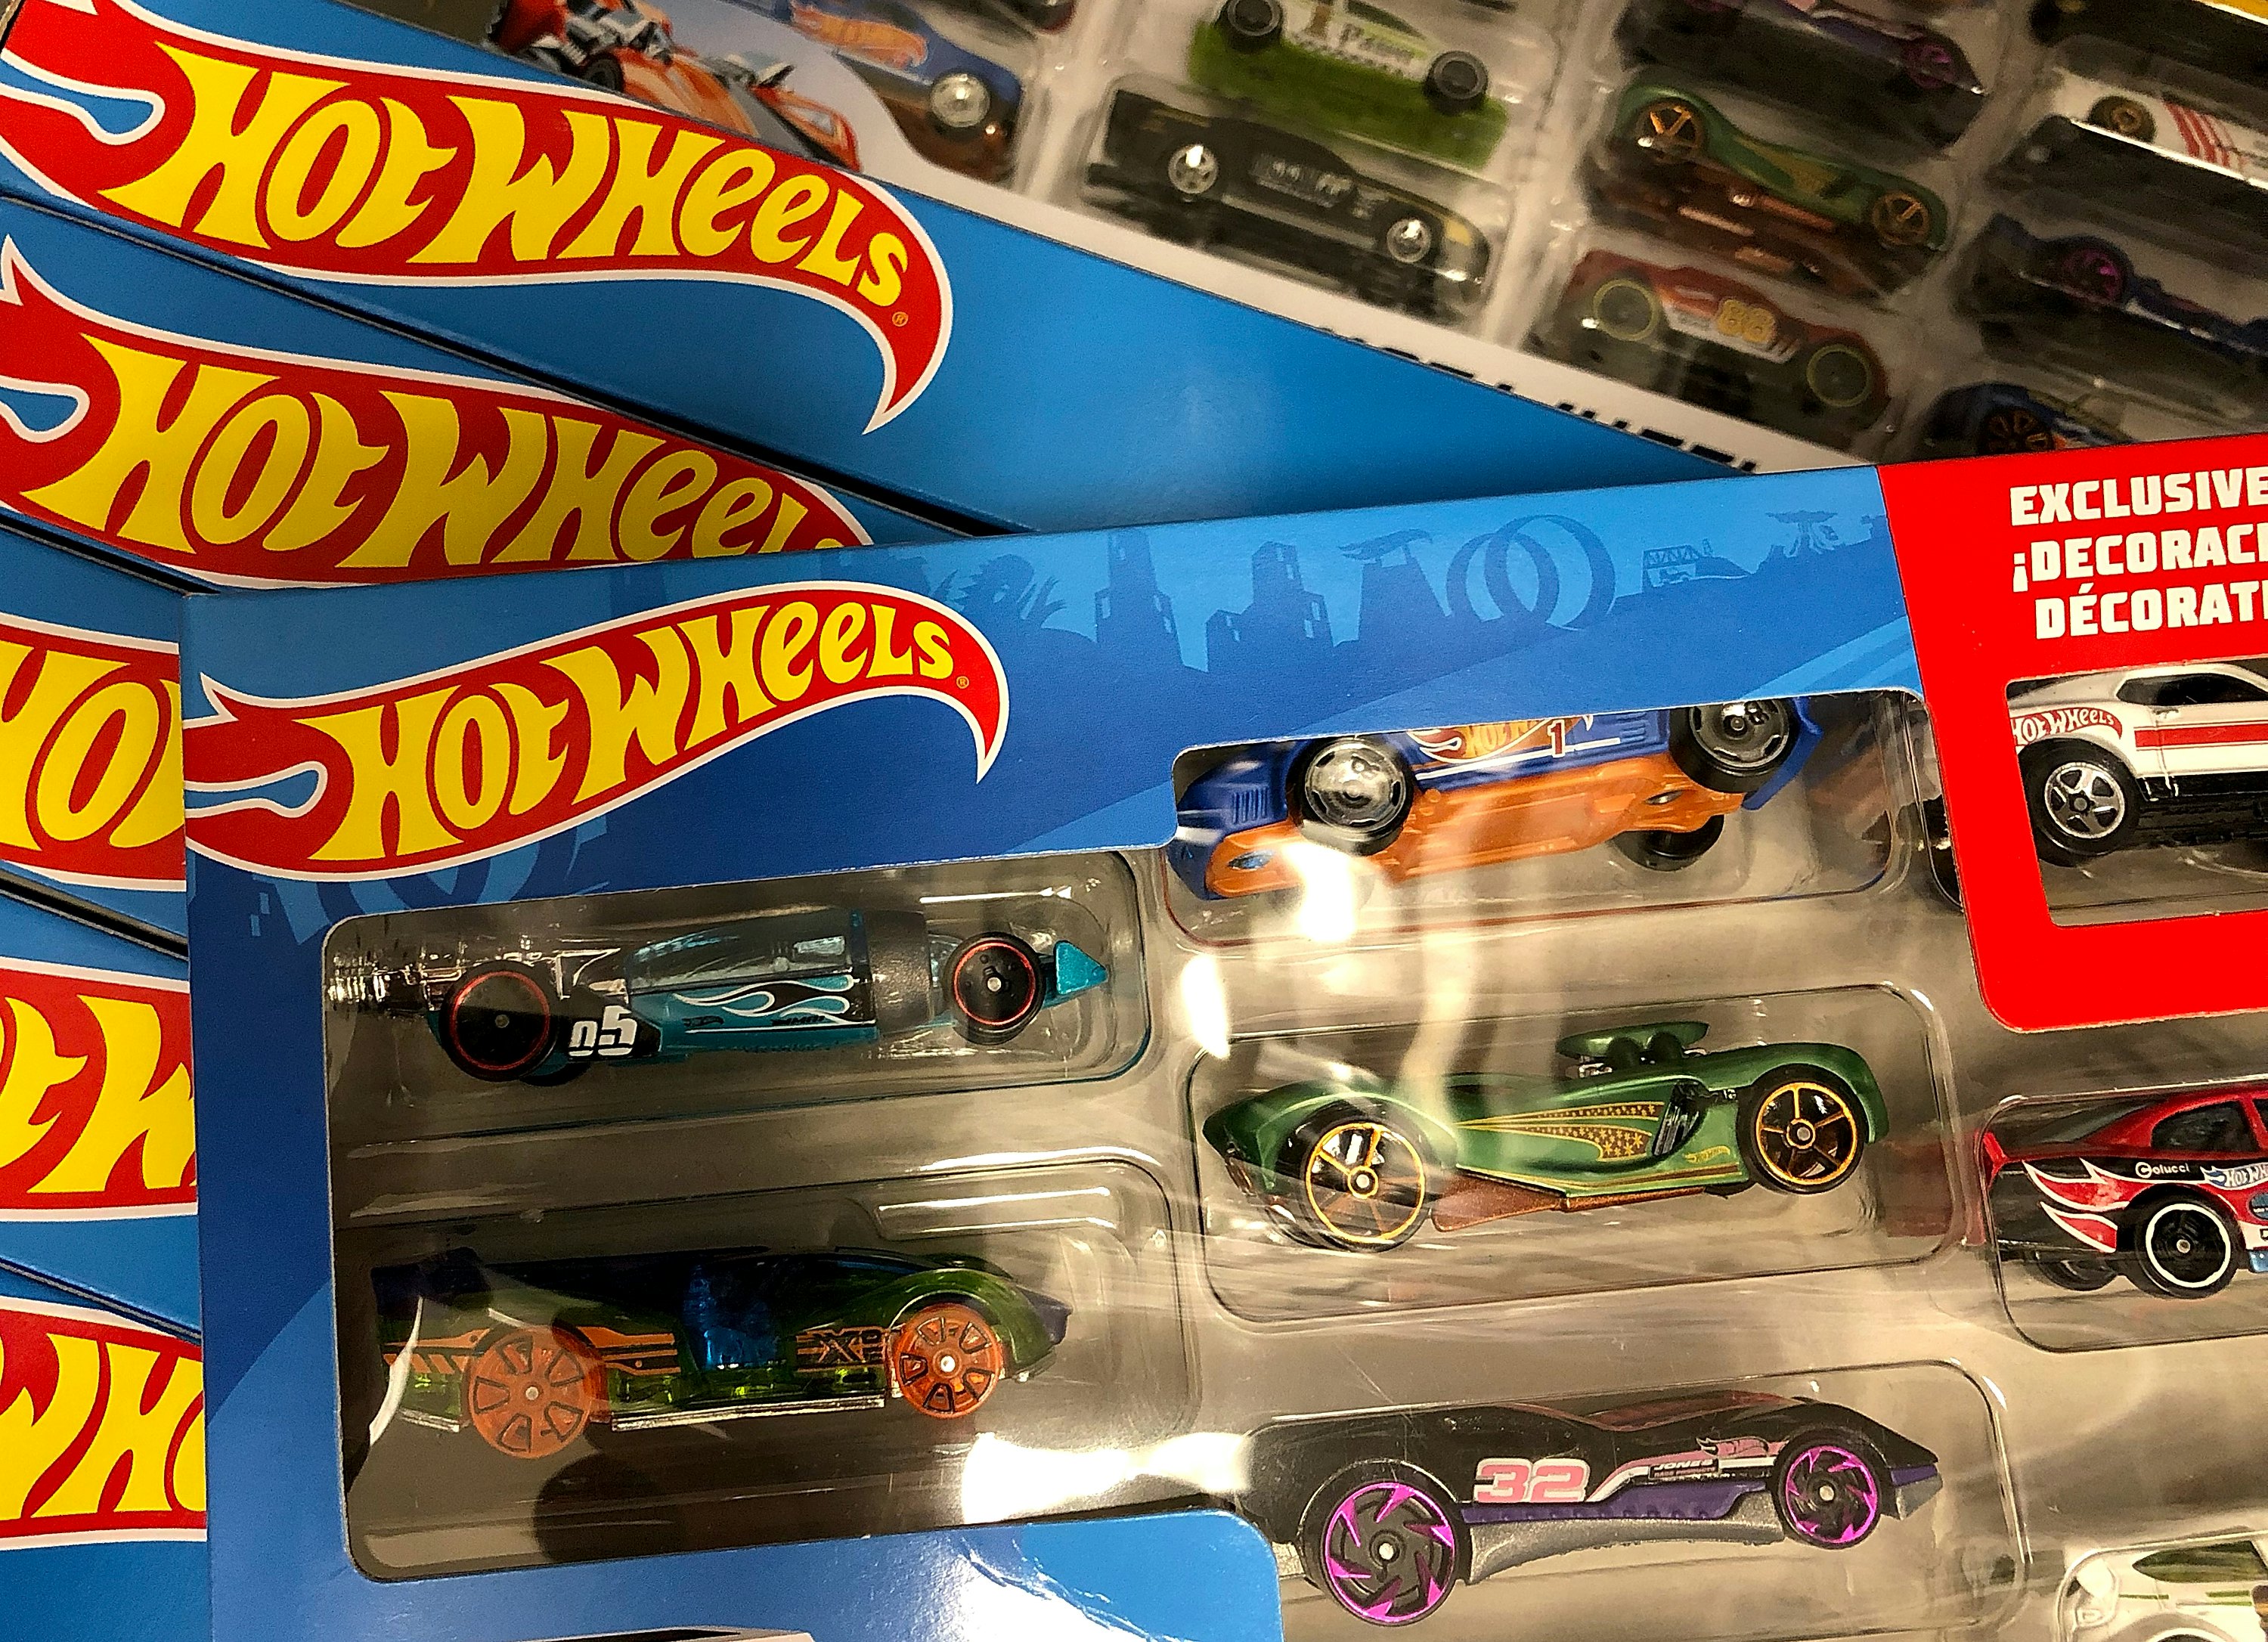 mini toy cars from the 90s